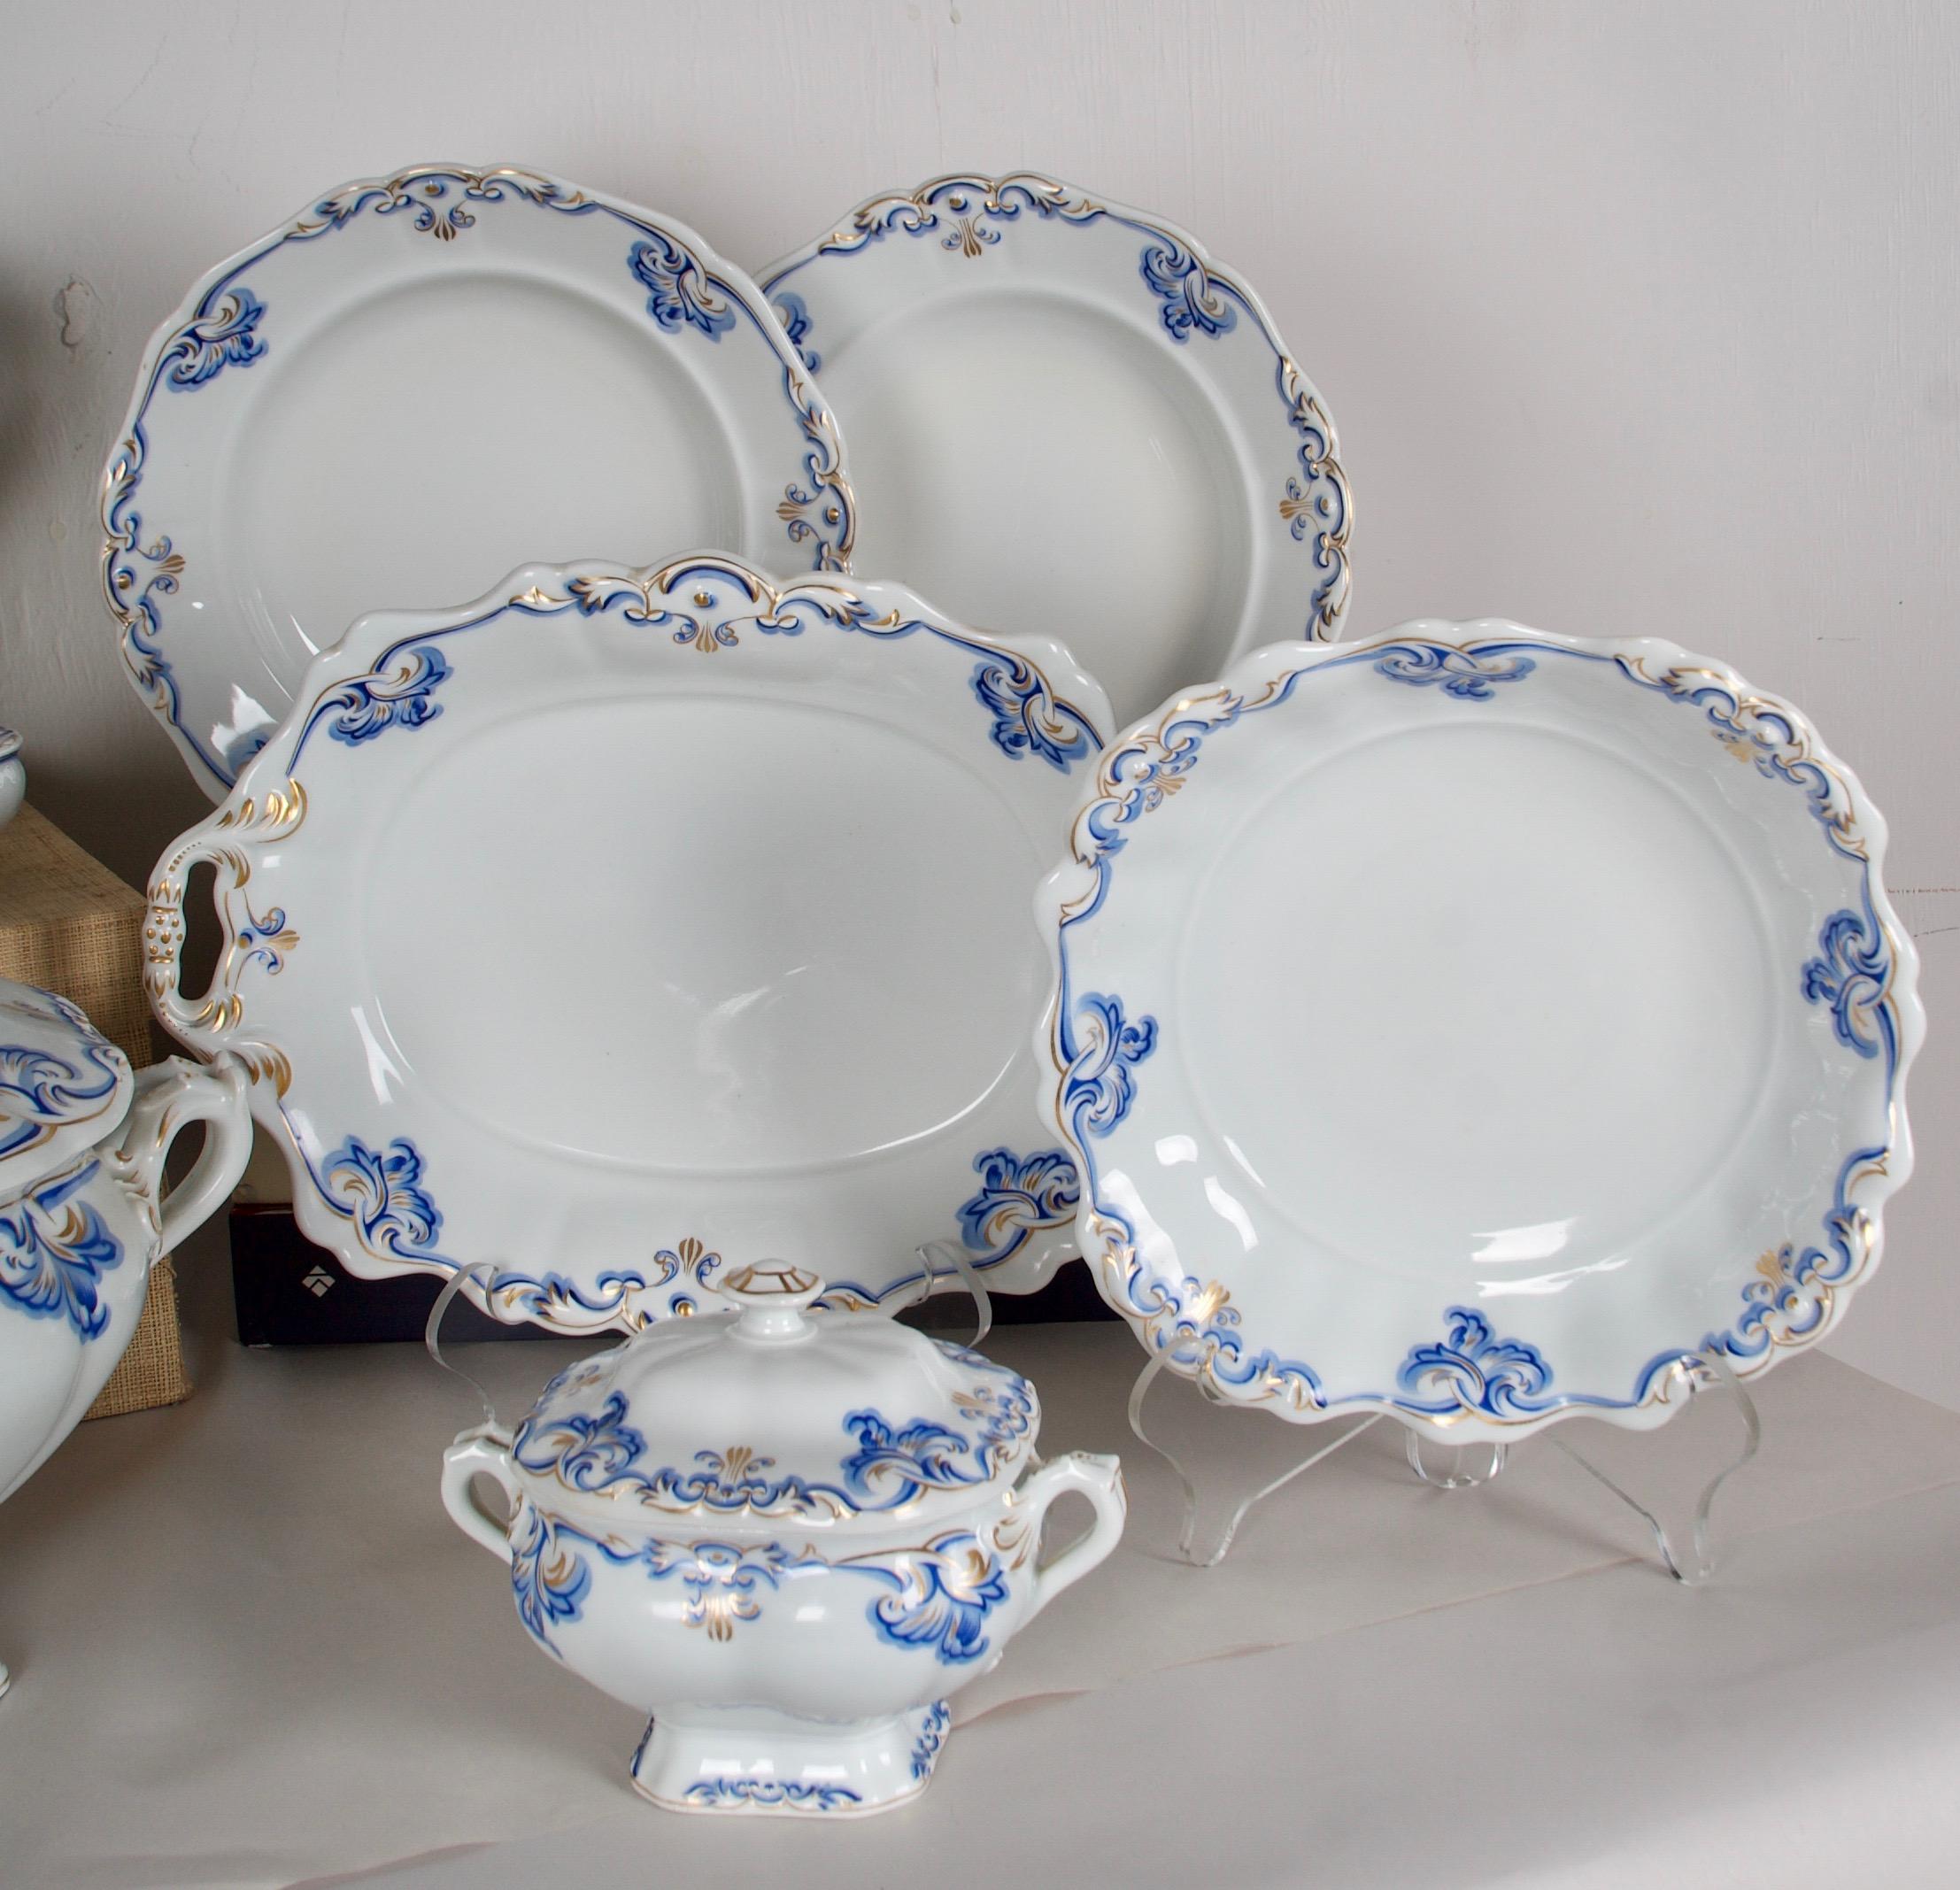 This extremely rare partial set of dinner service was produced
at the Royal Vienna Factory in 1851 under the direction of Baron
Leithner, ten years before the factory closed.
During Leithner's direction, the factory and it's artists were still
known